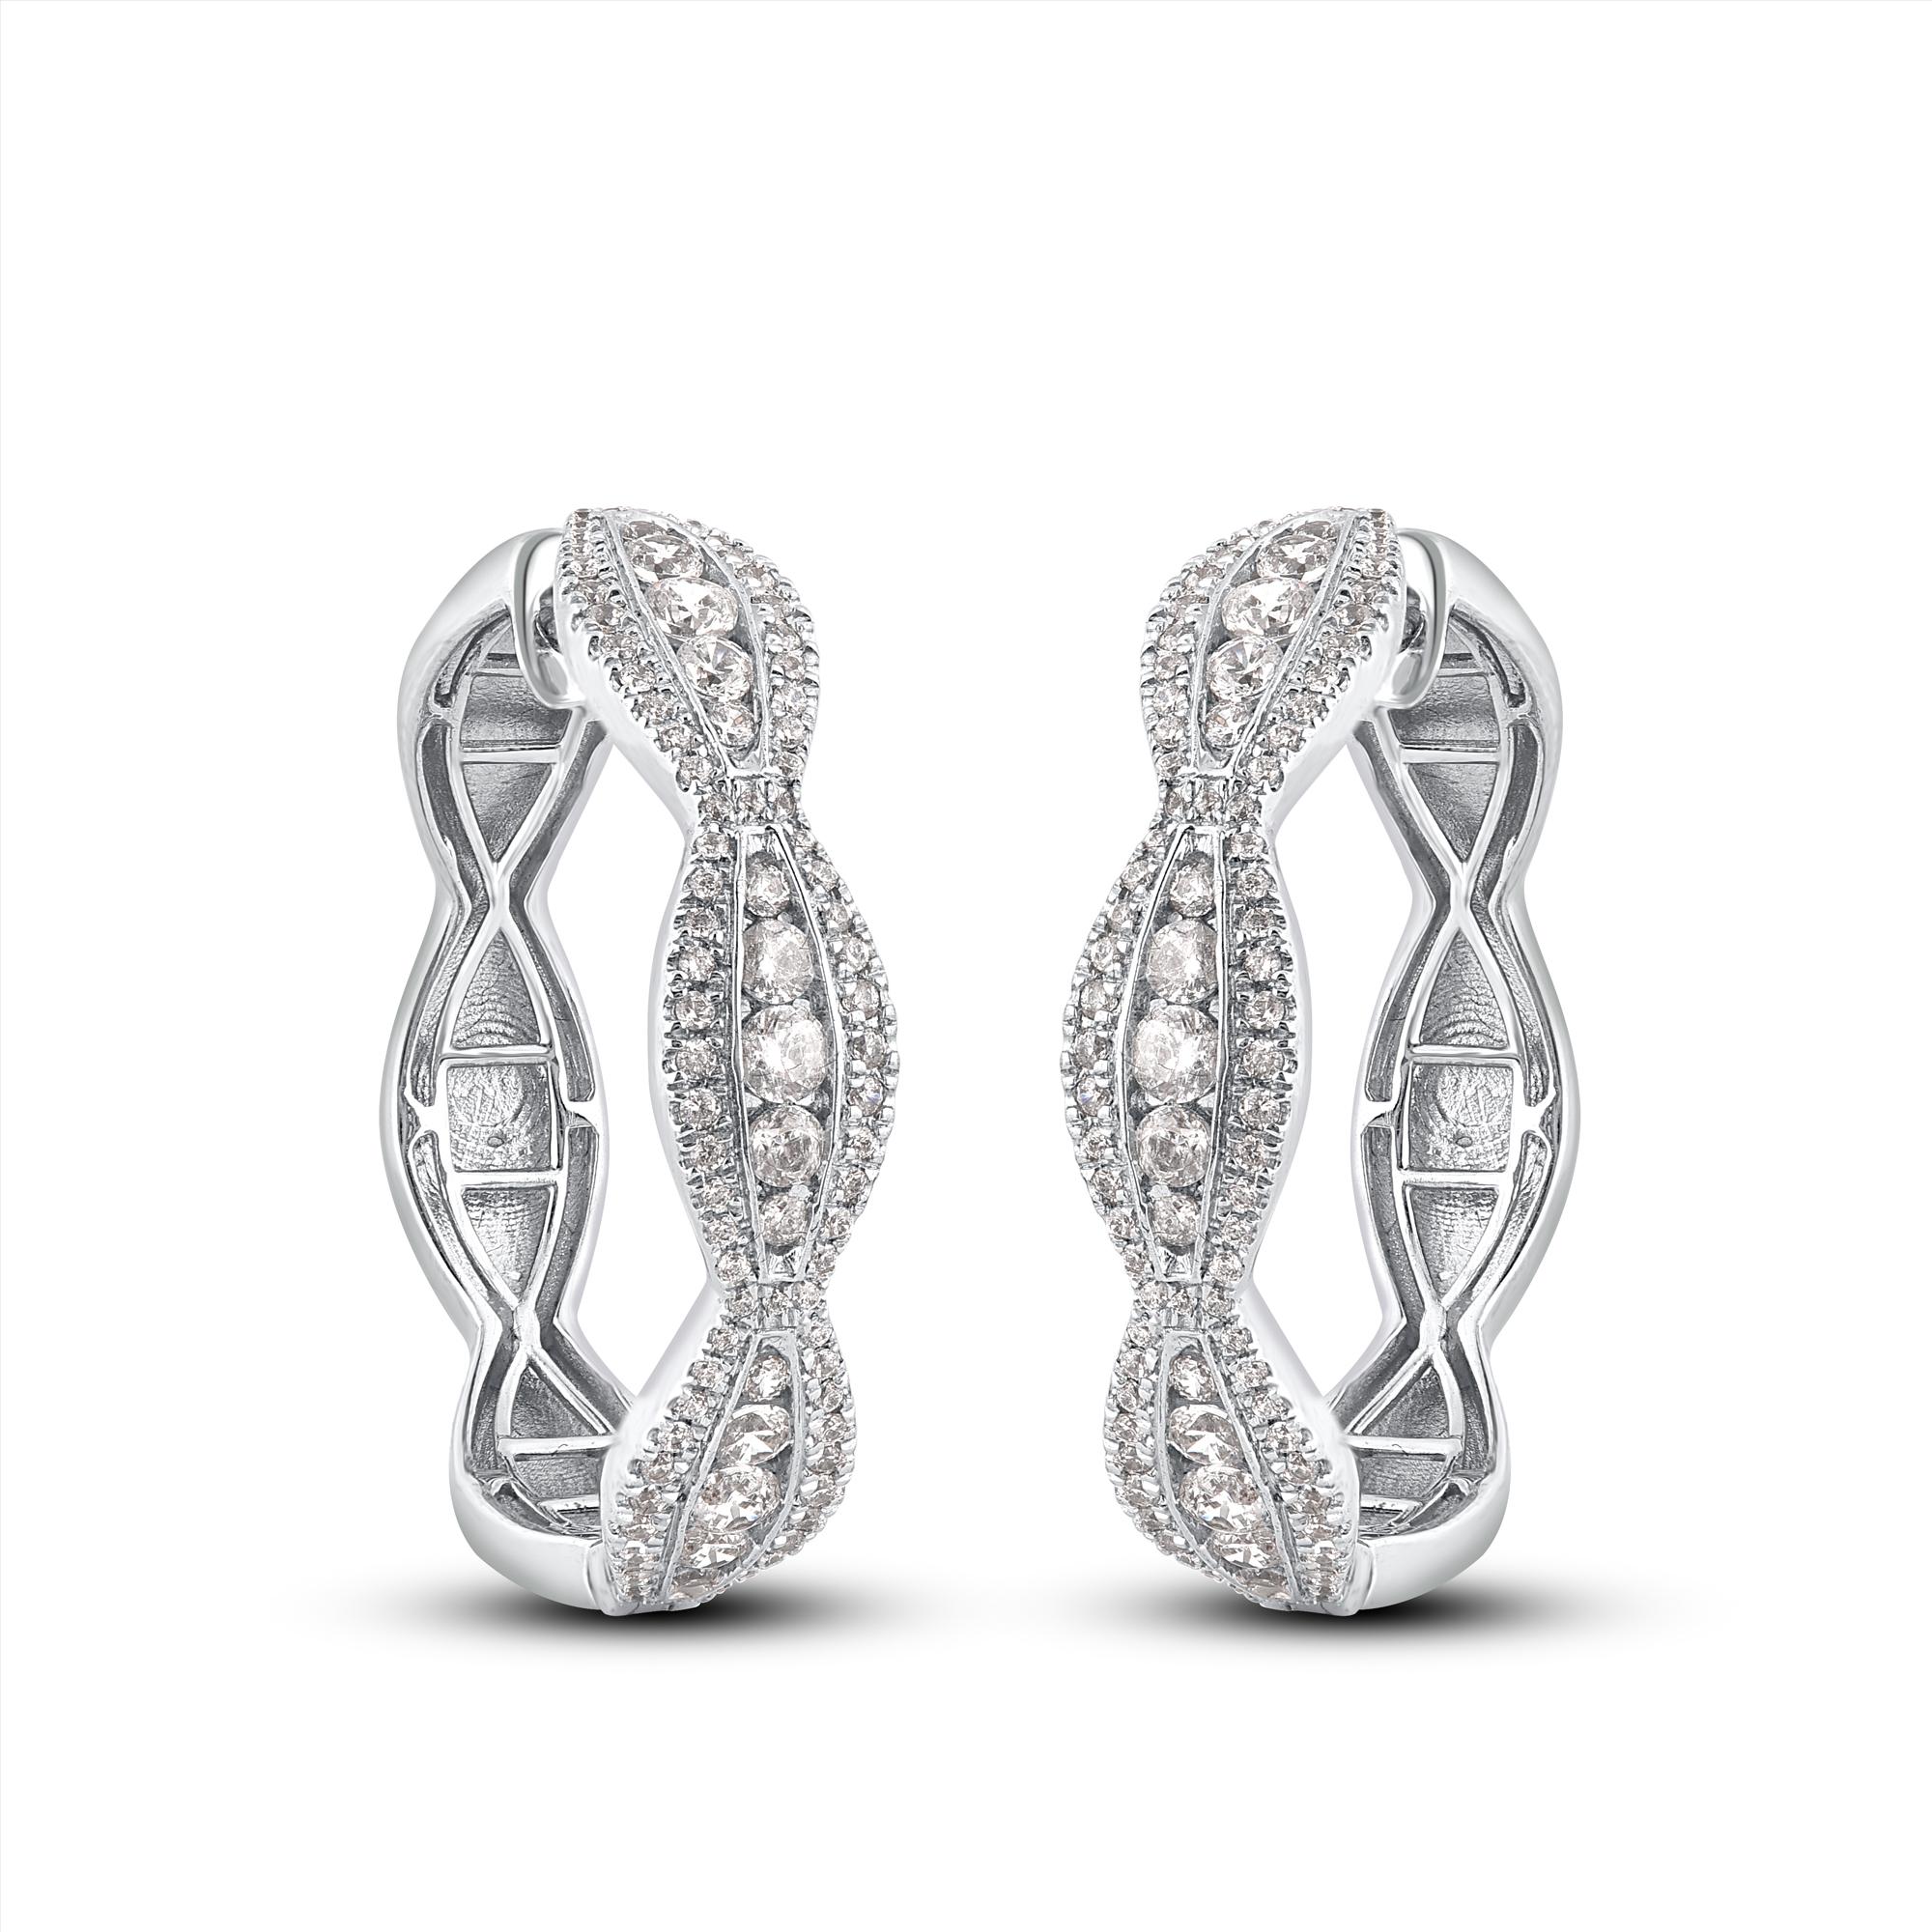 Wow her with the dazzling good looks of these diamond hoop earrings. Crafted to perfection in 18 karat white gold and studded with 186 round brilliant diamond set in micro-prong and channel setting, and shines in H-I color I1 clarity. Captivates